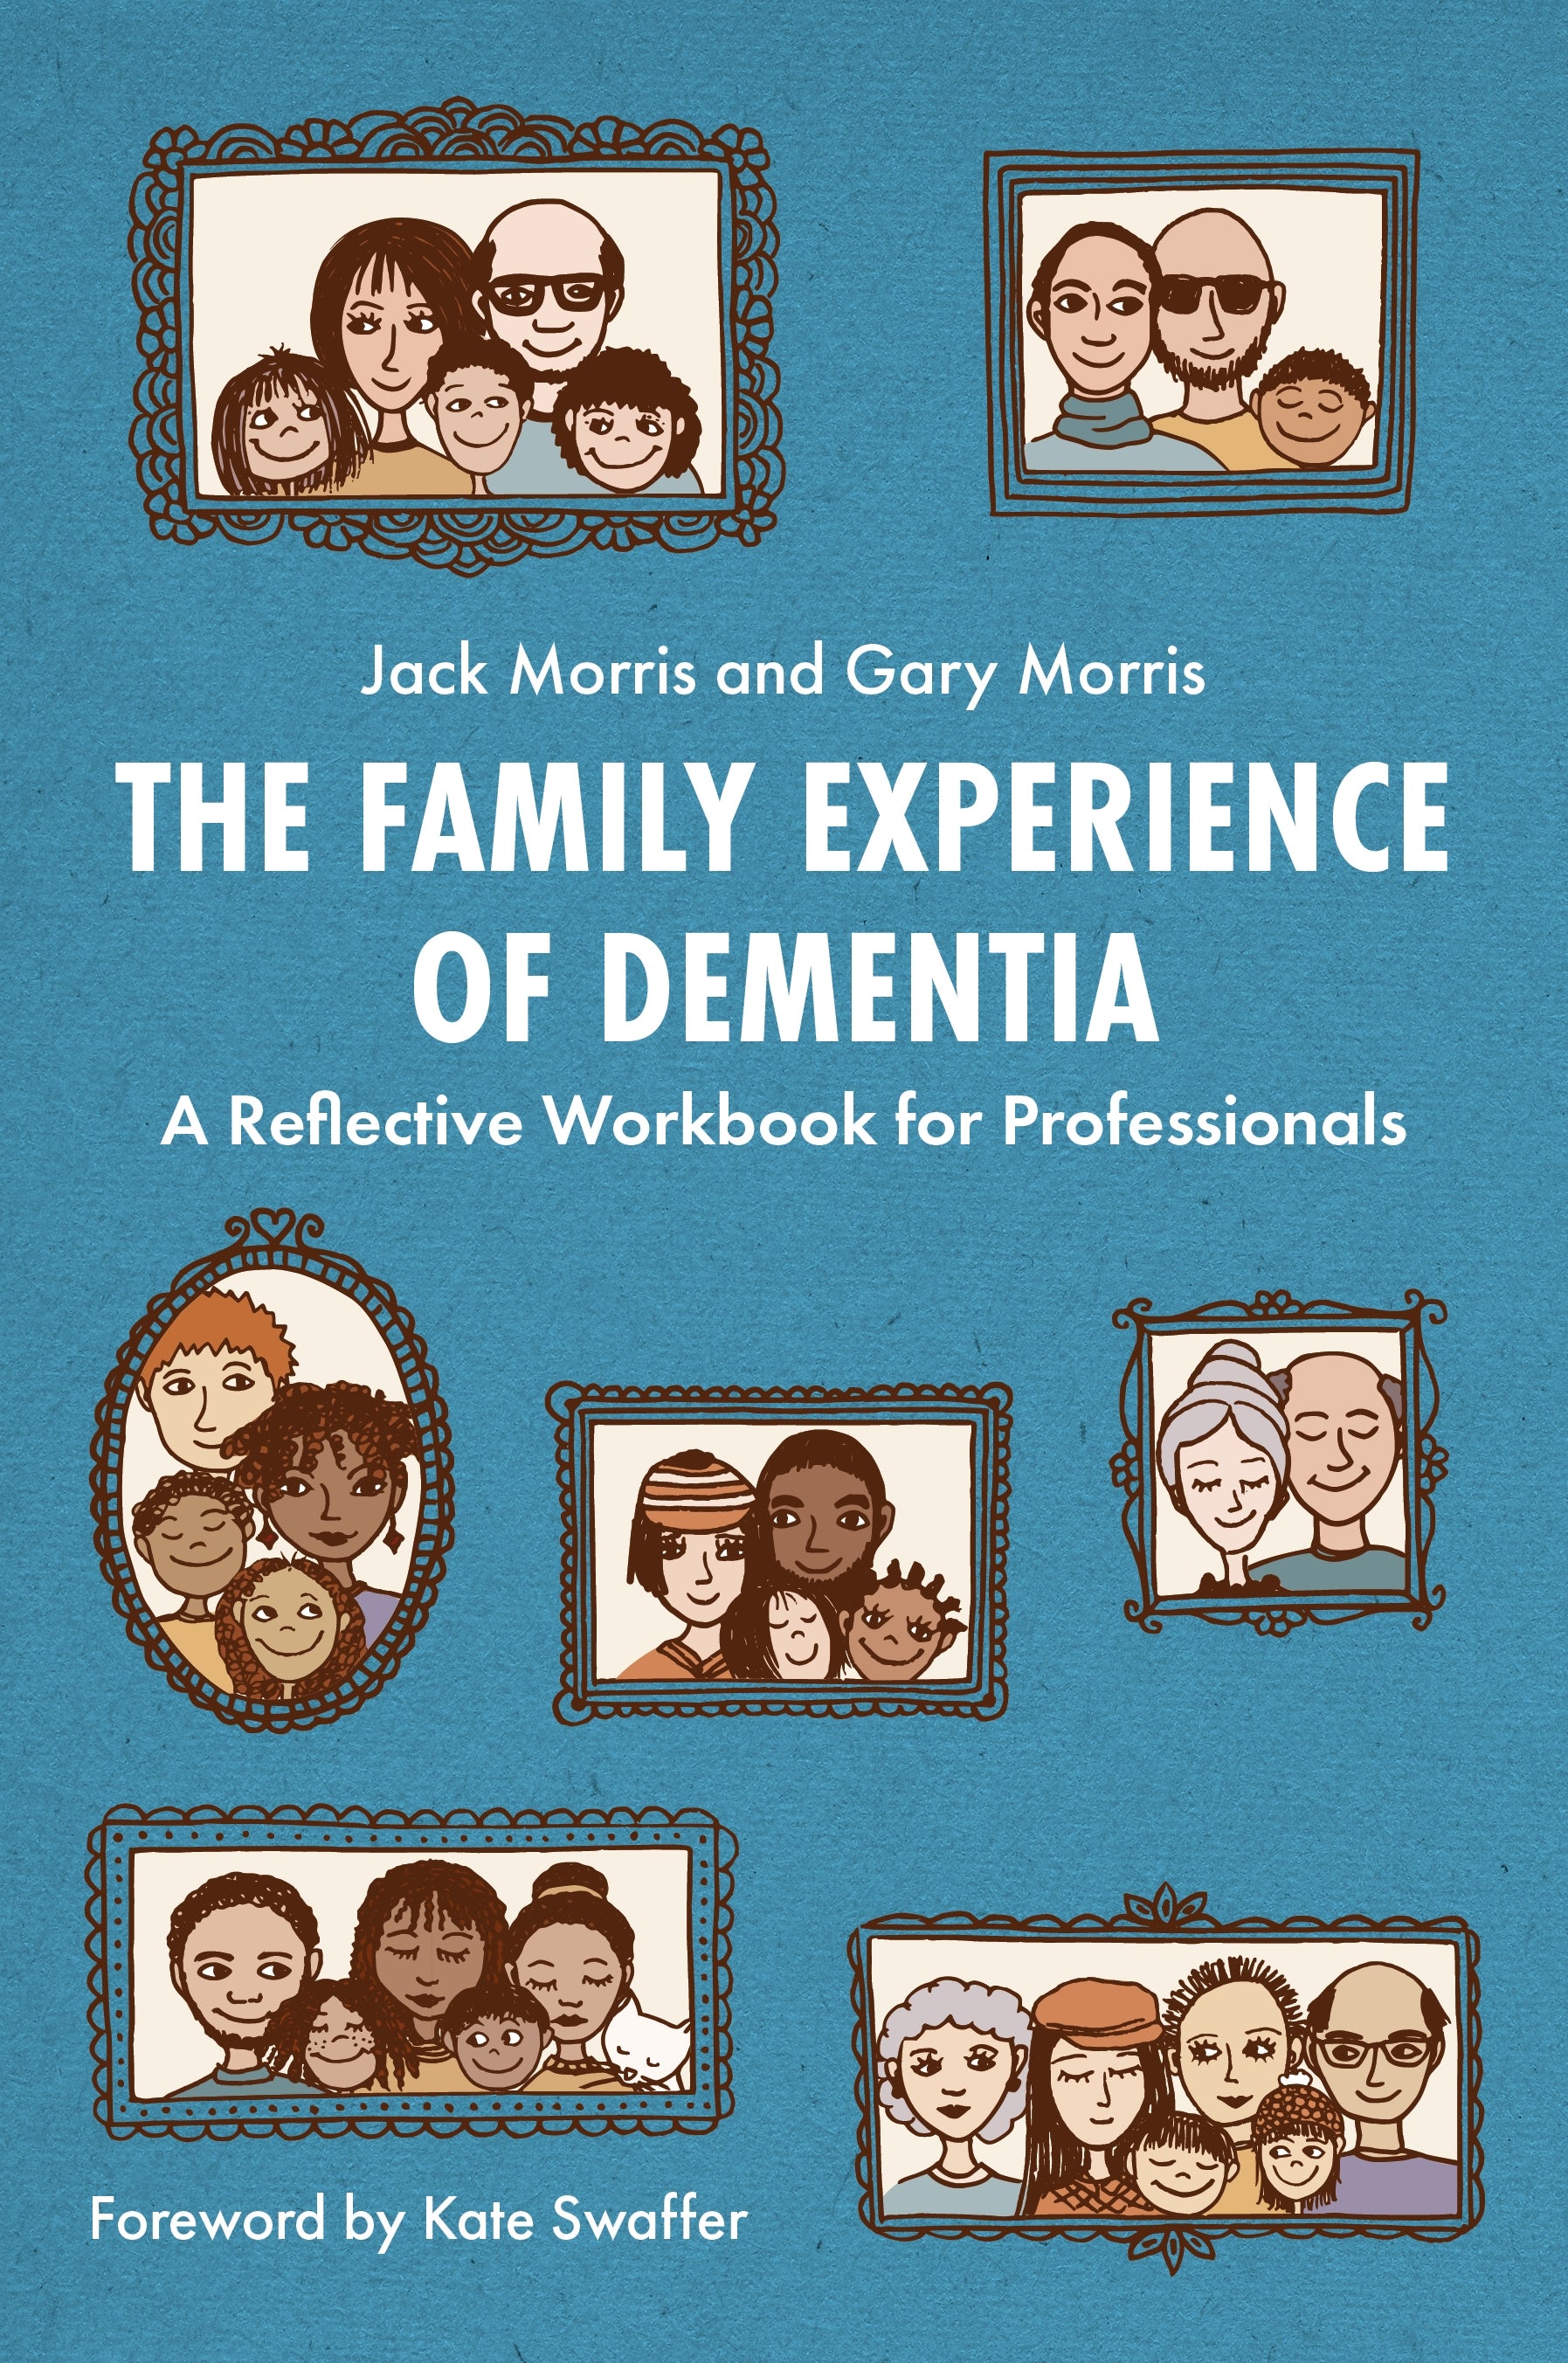 The Family Experience of Dementia by Kate Swaffer, Gary Morris, Jack Morris